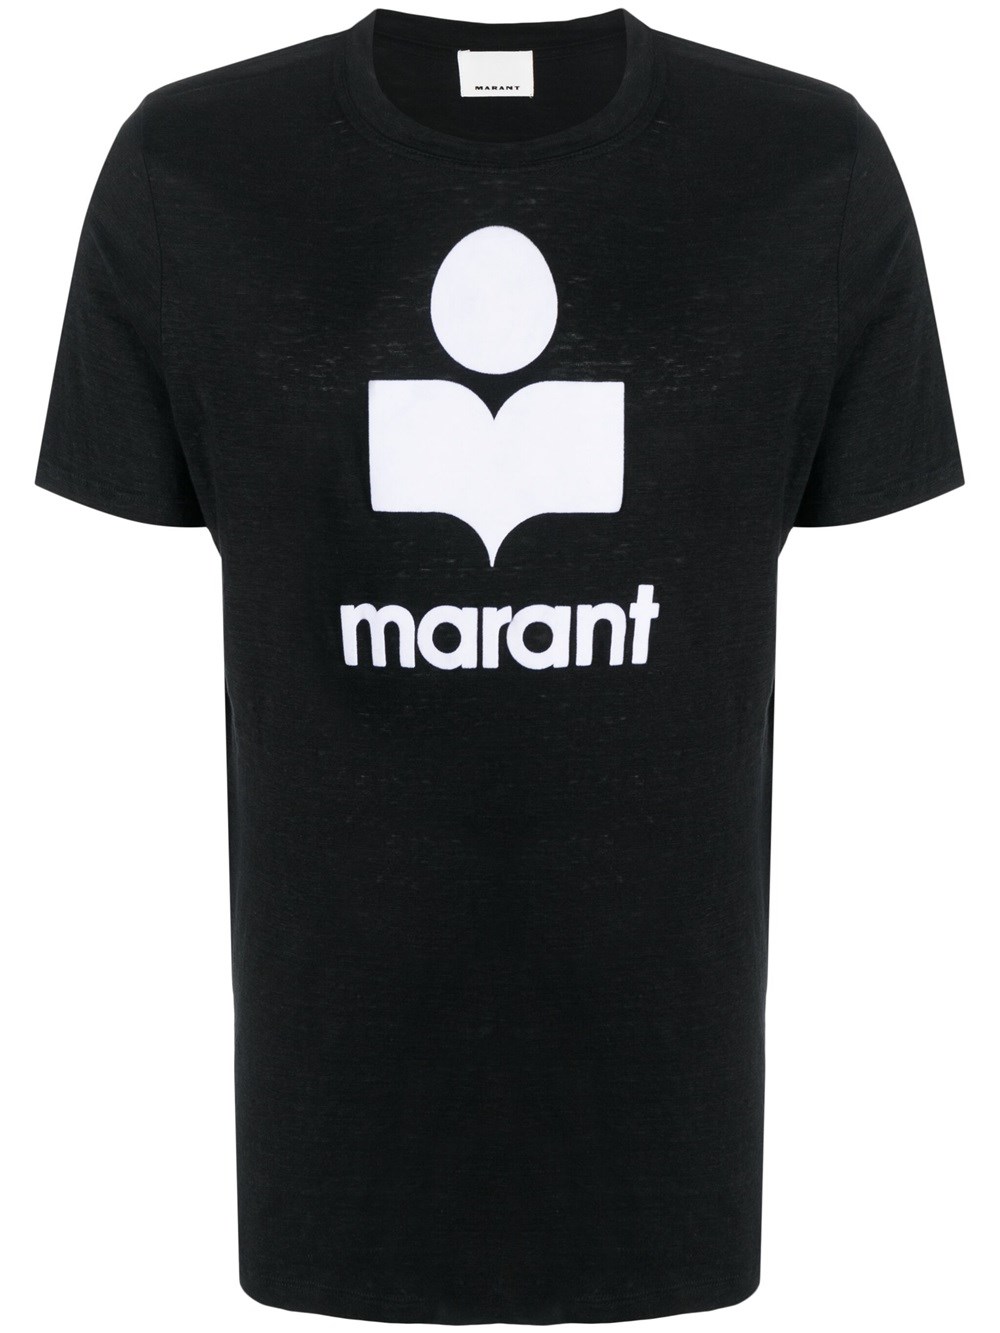 Isabel Marant T-shirt With Print In Black